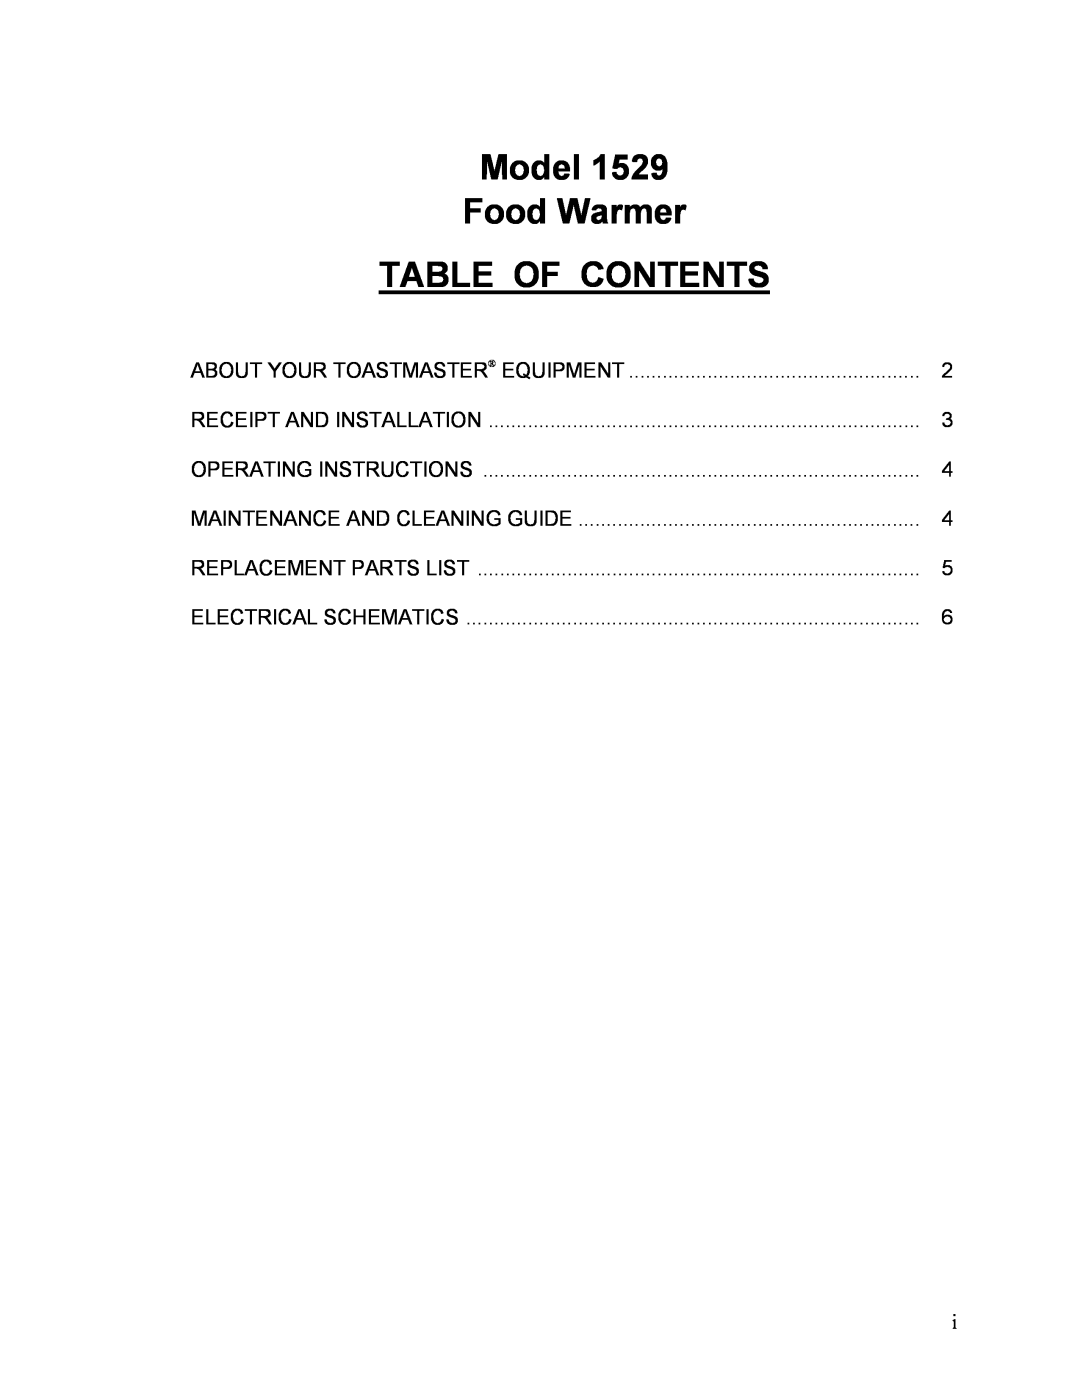 Toastmaster 1529 owner manual Model Food Warmer TABLE OF CONTENTS 